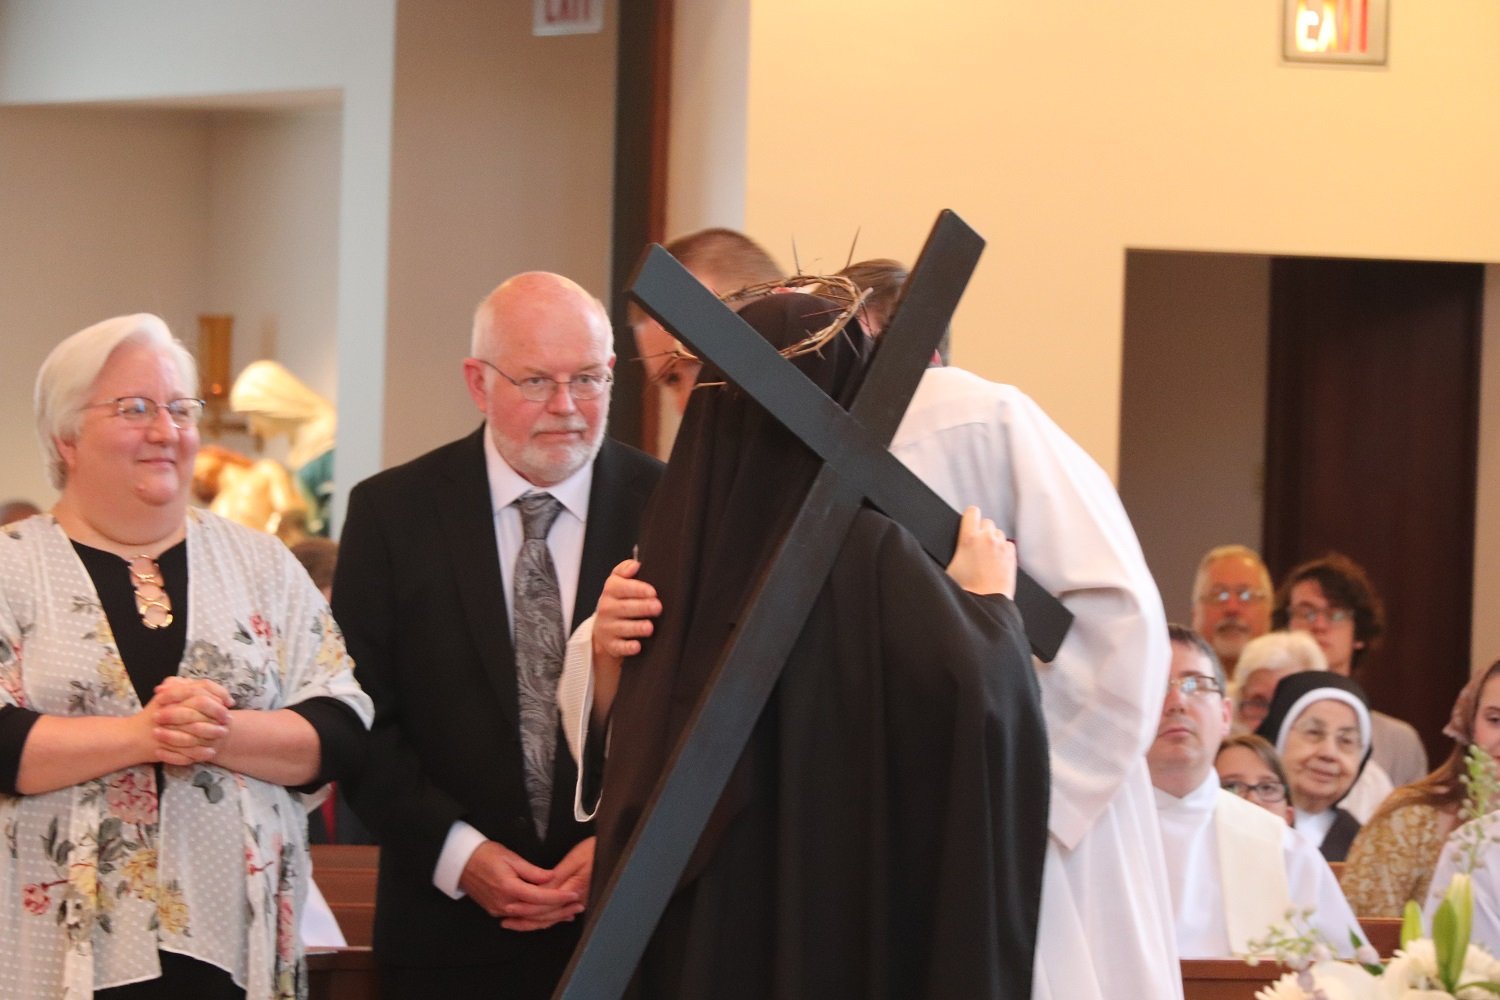  The two religious in the family — Sister Frances Marie and Br. Emmanuel — exchange the Sign of Peace as their proud parents look on 